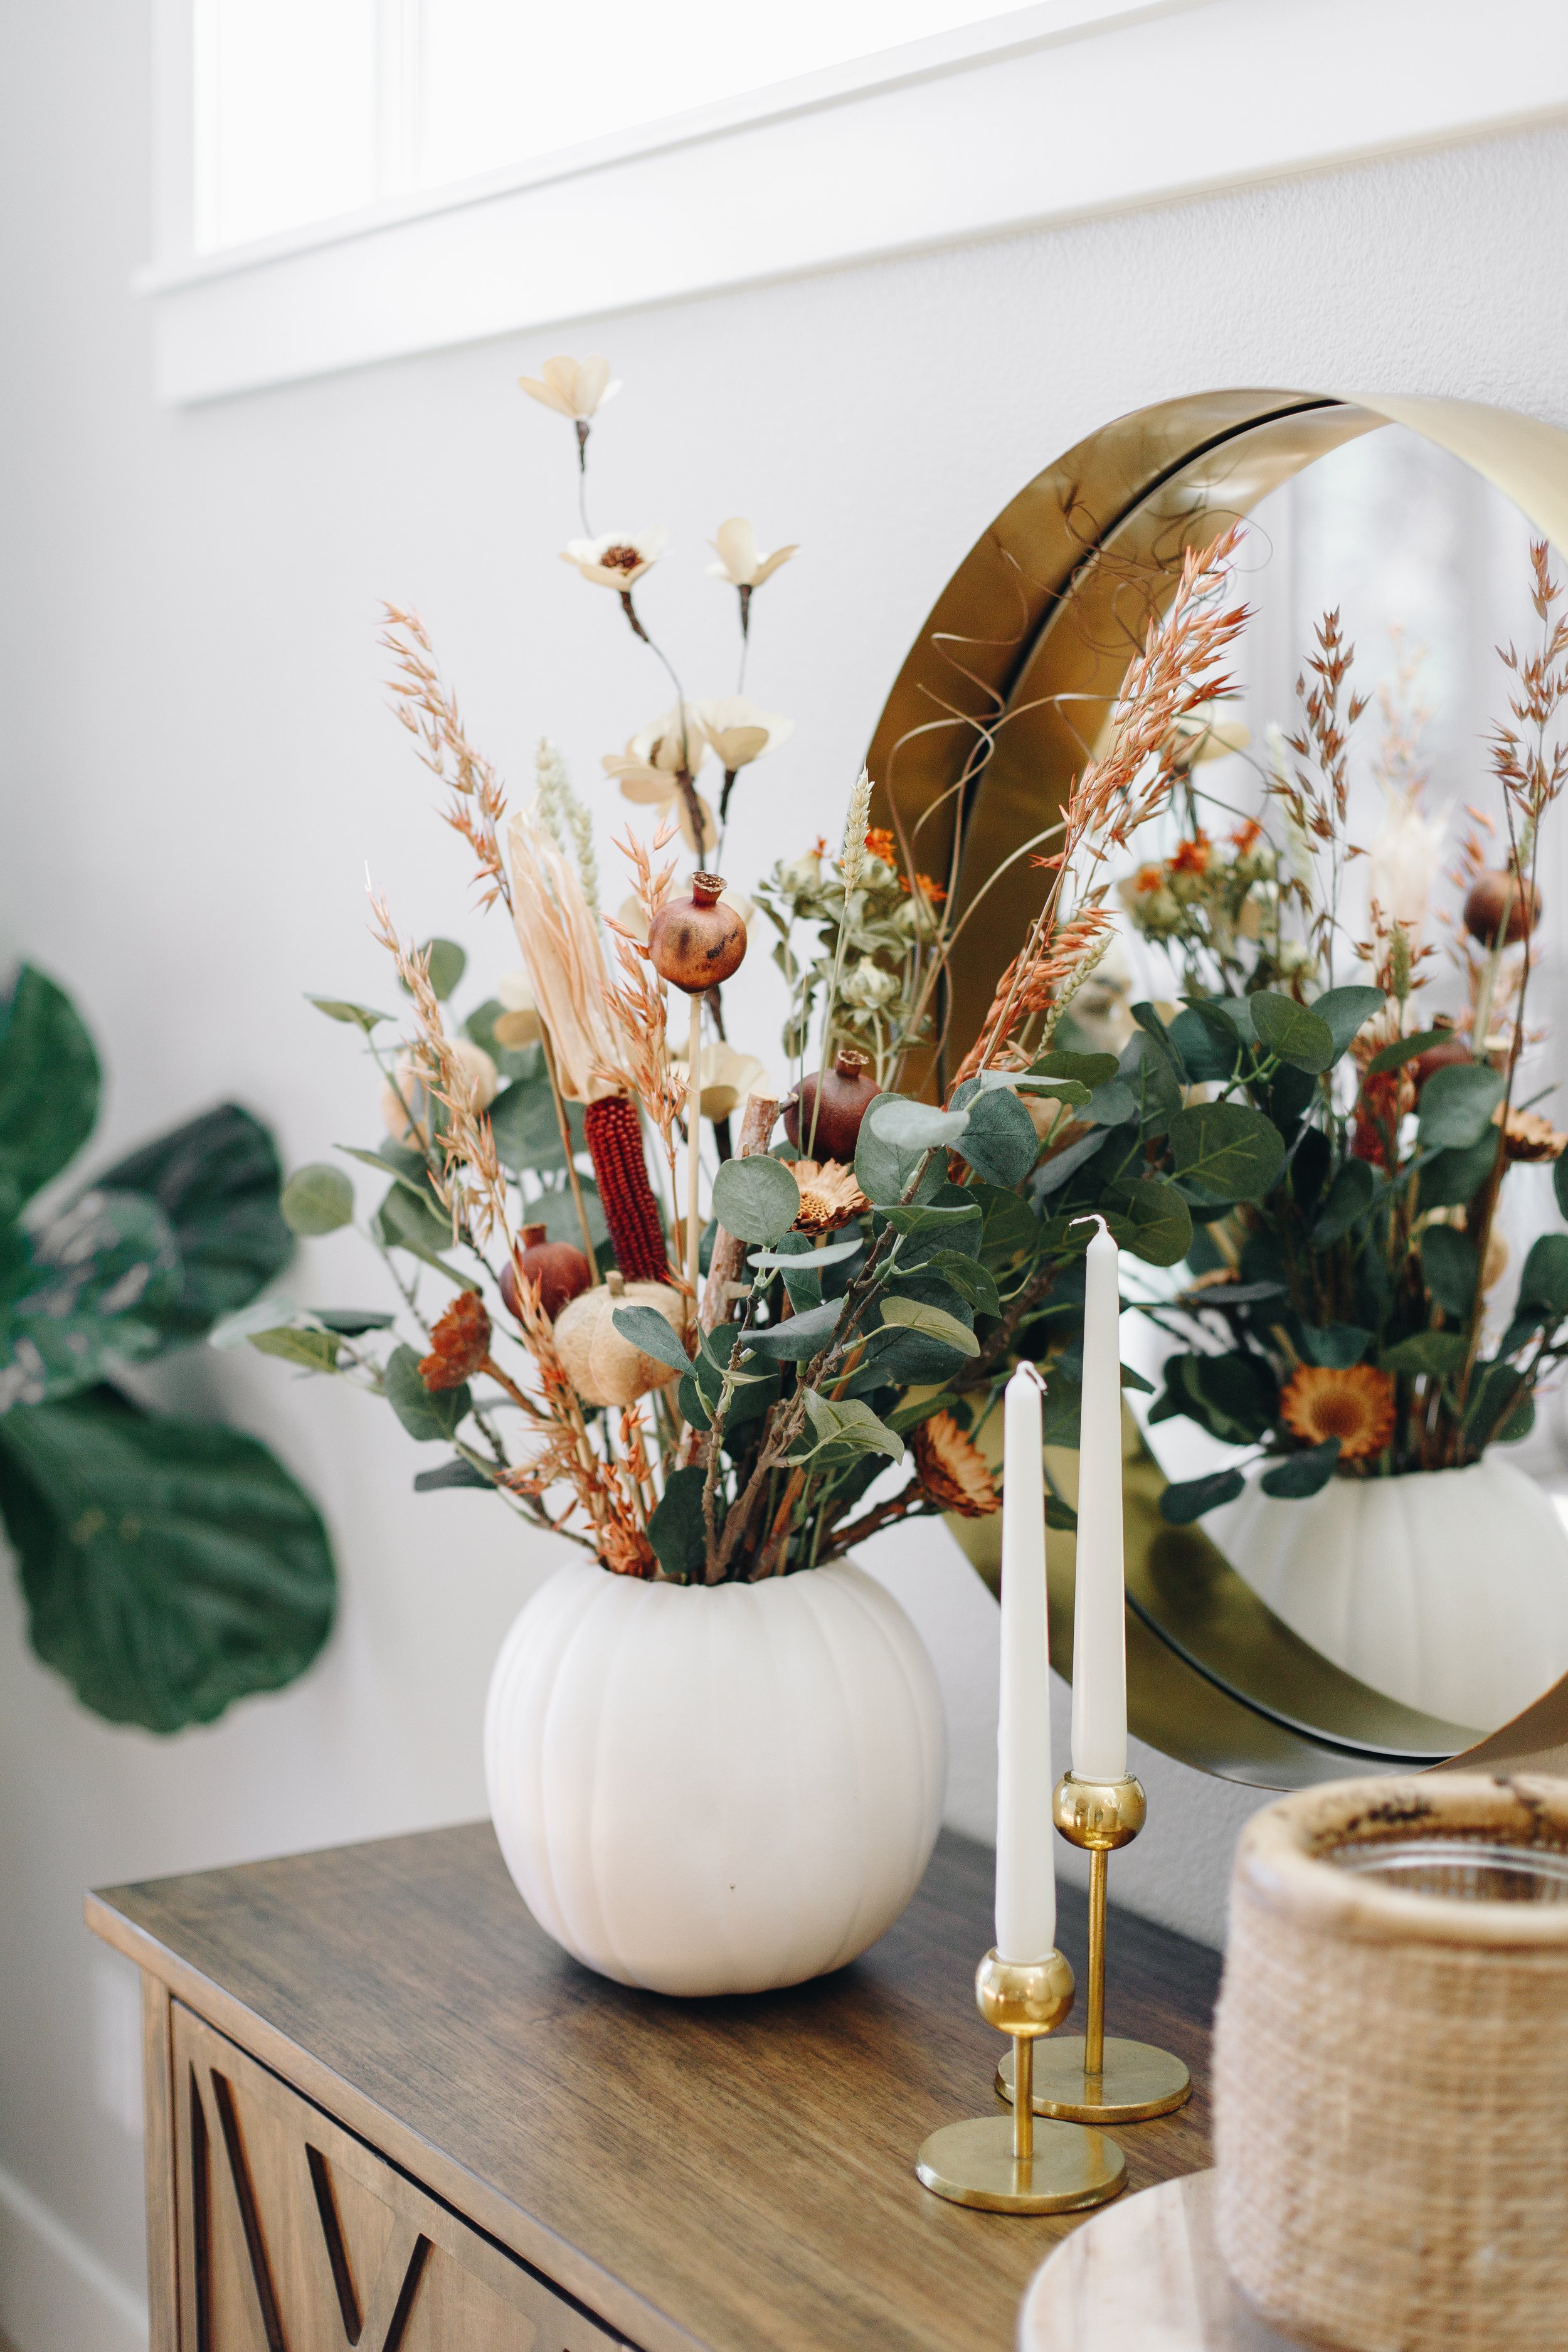 decorate your home for fall with dried naturals to revamp your decor